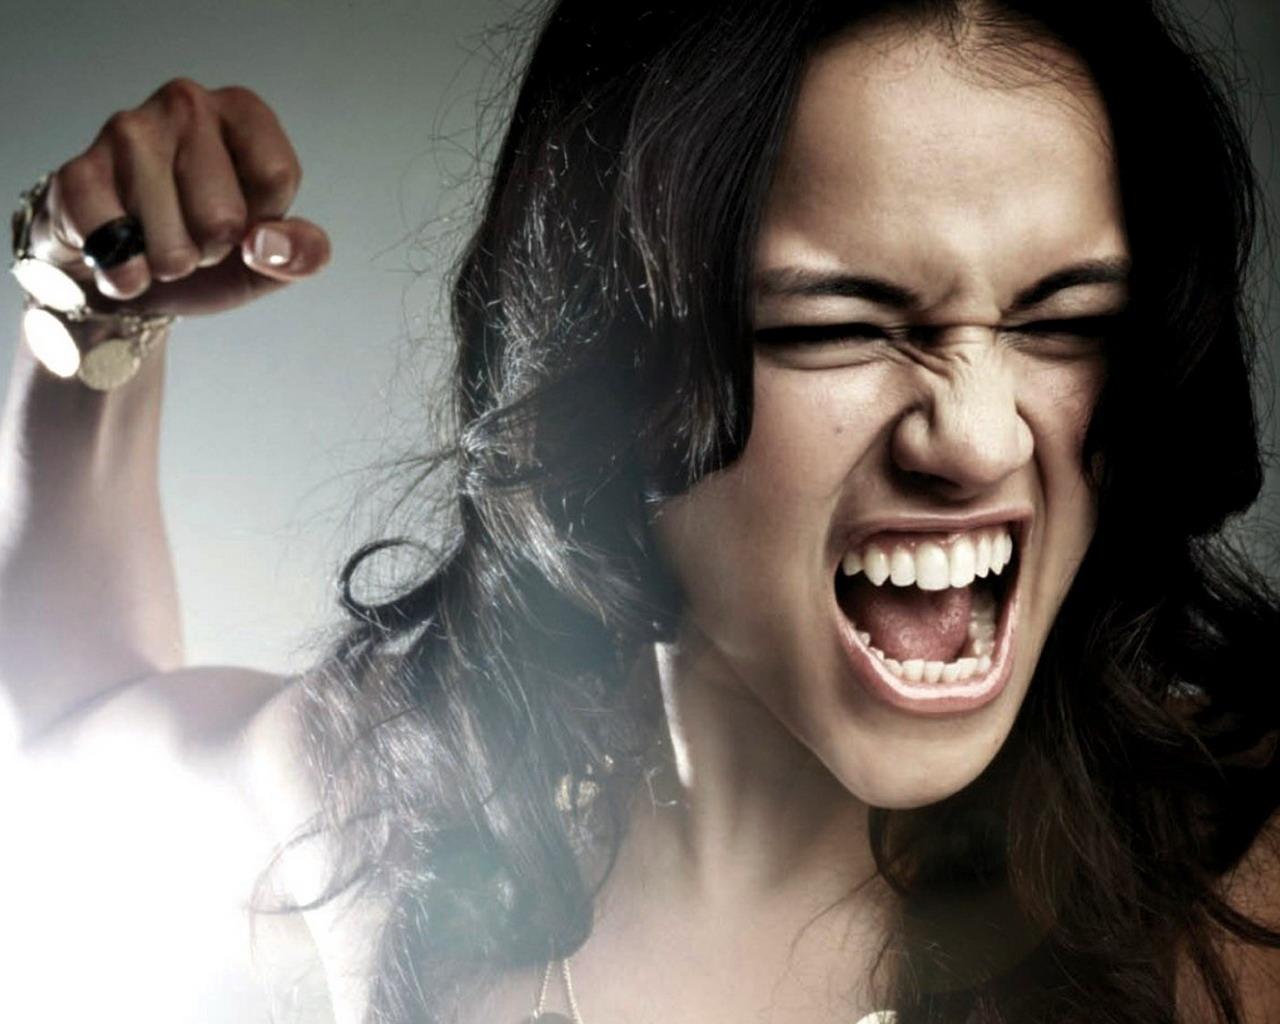 20 Quotes That May Make You Less Angry